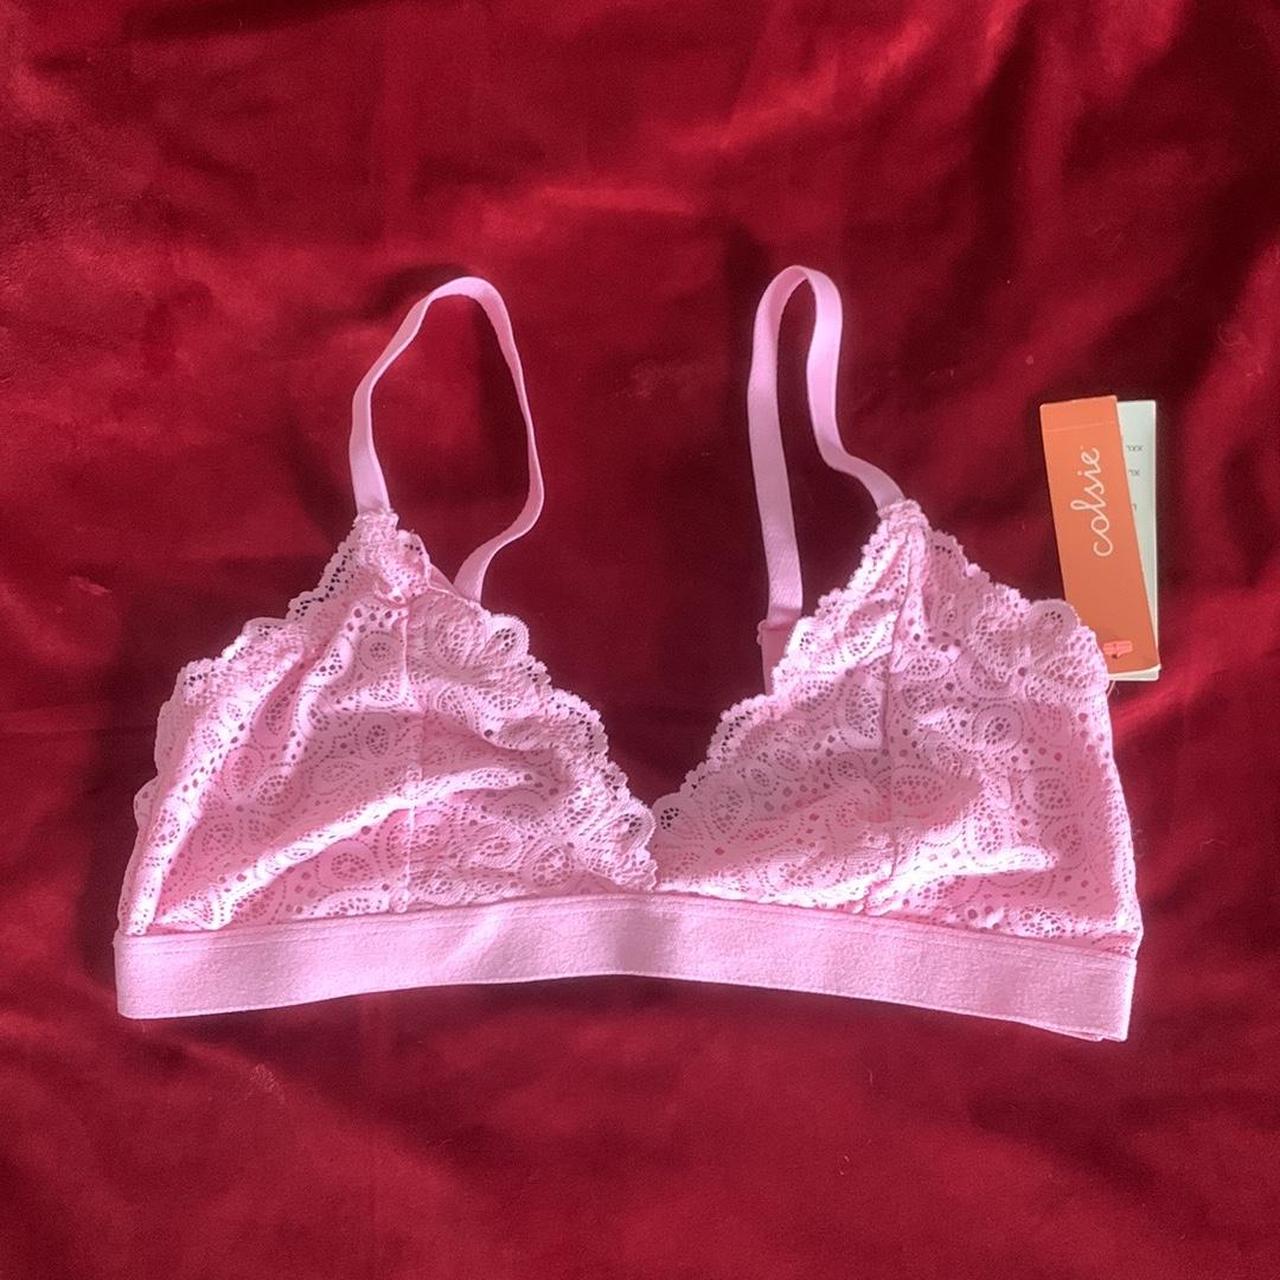 super cute lace pink top!! built in bra so holds - Depop